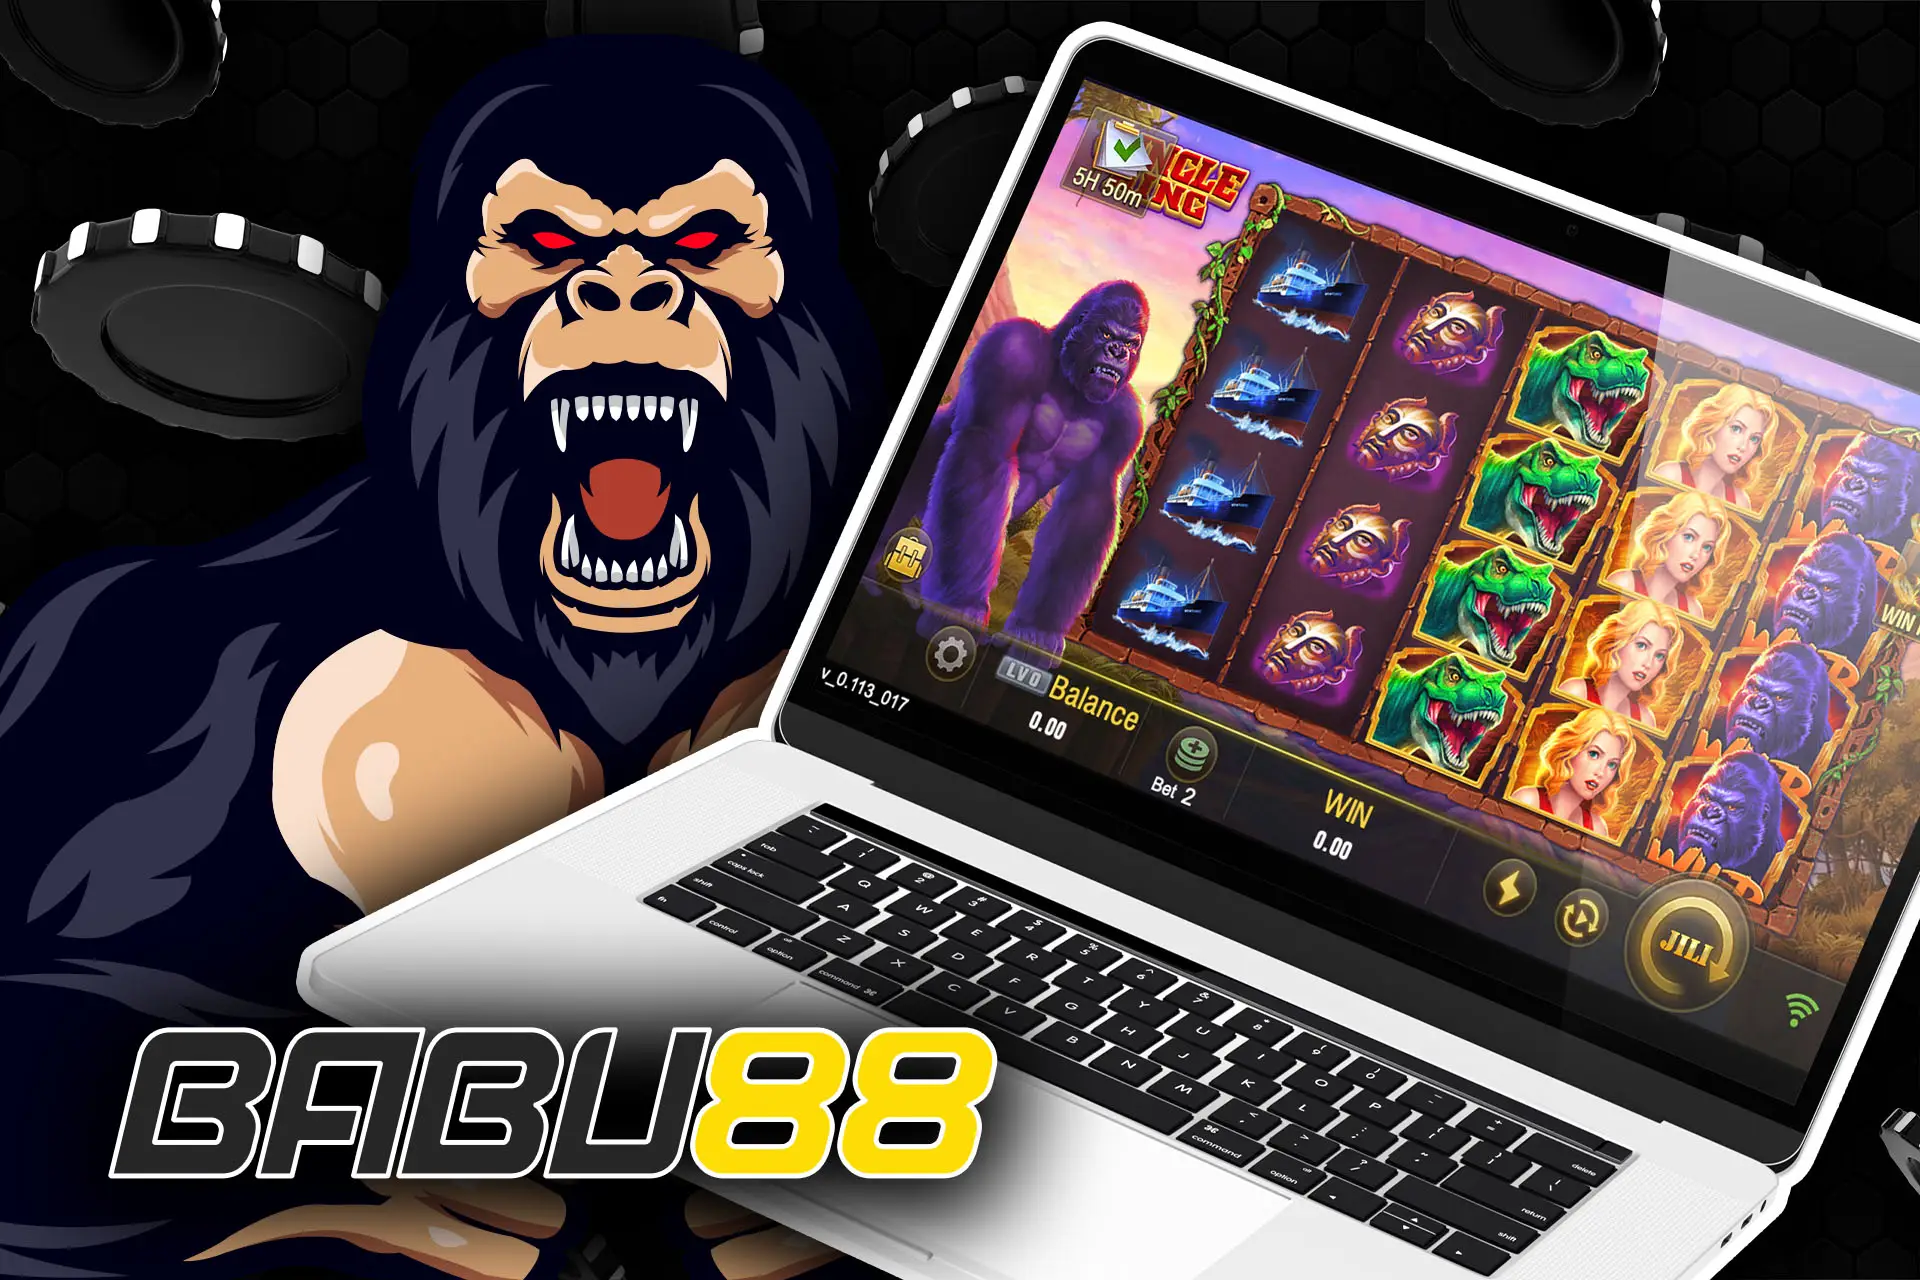 Catch 3 scatters to multiply your winnings in the Jungle King slot.